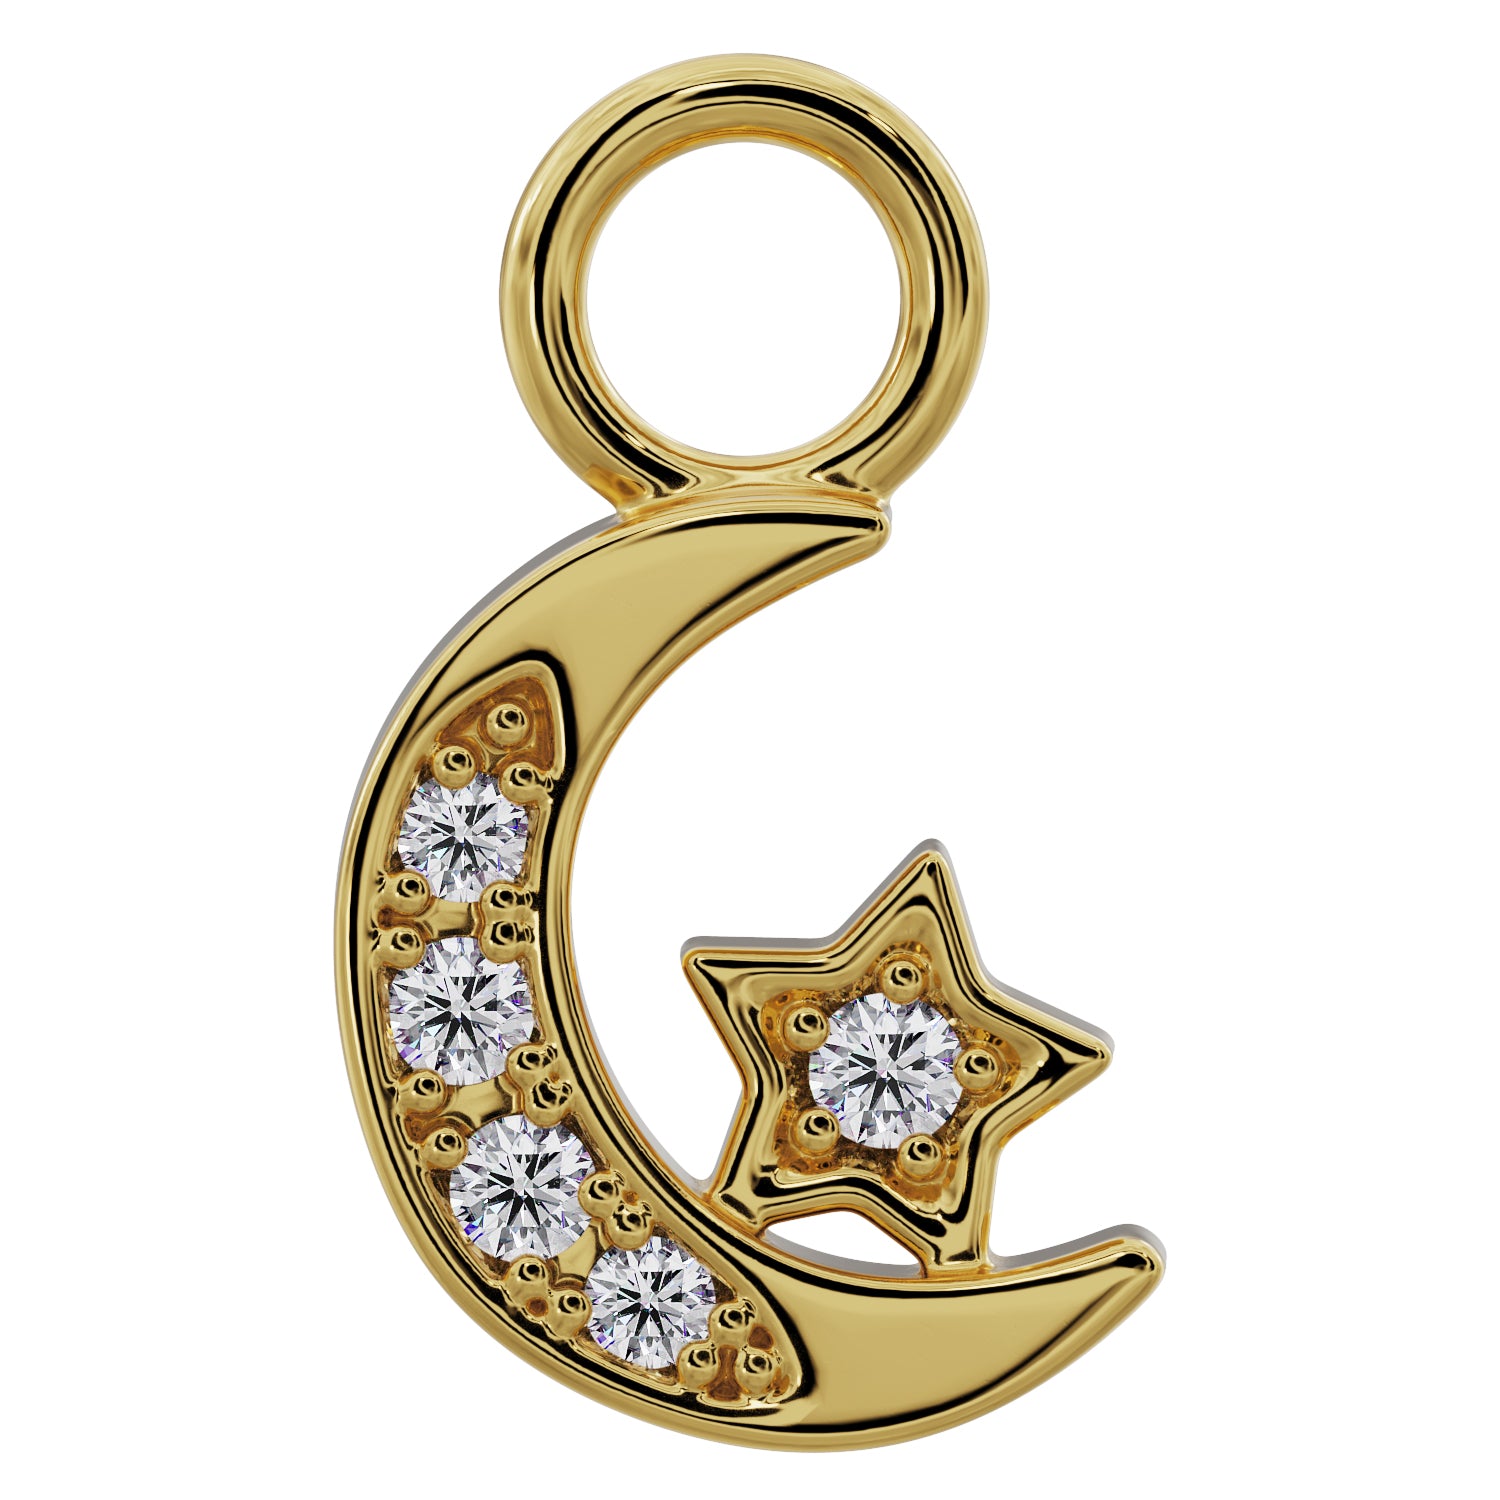 Moon and Star Diamond Charm Accessory for Piercing Jewelry-14K Yellow Gold